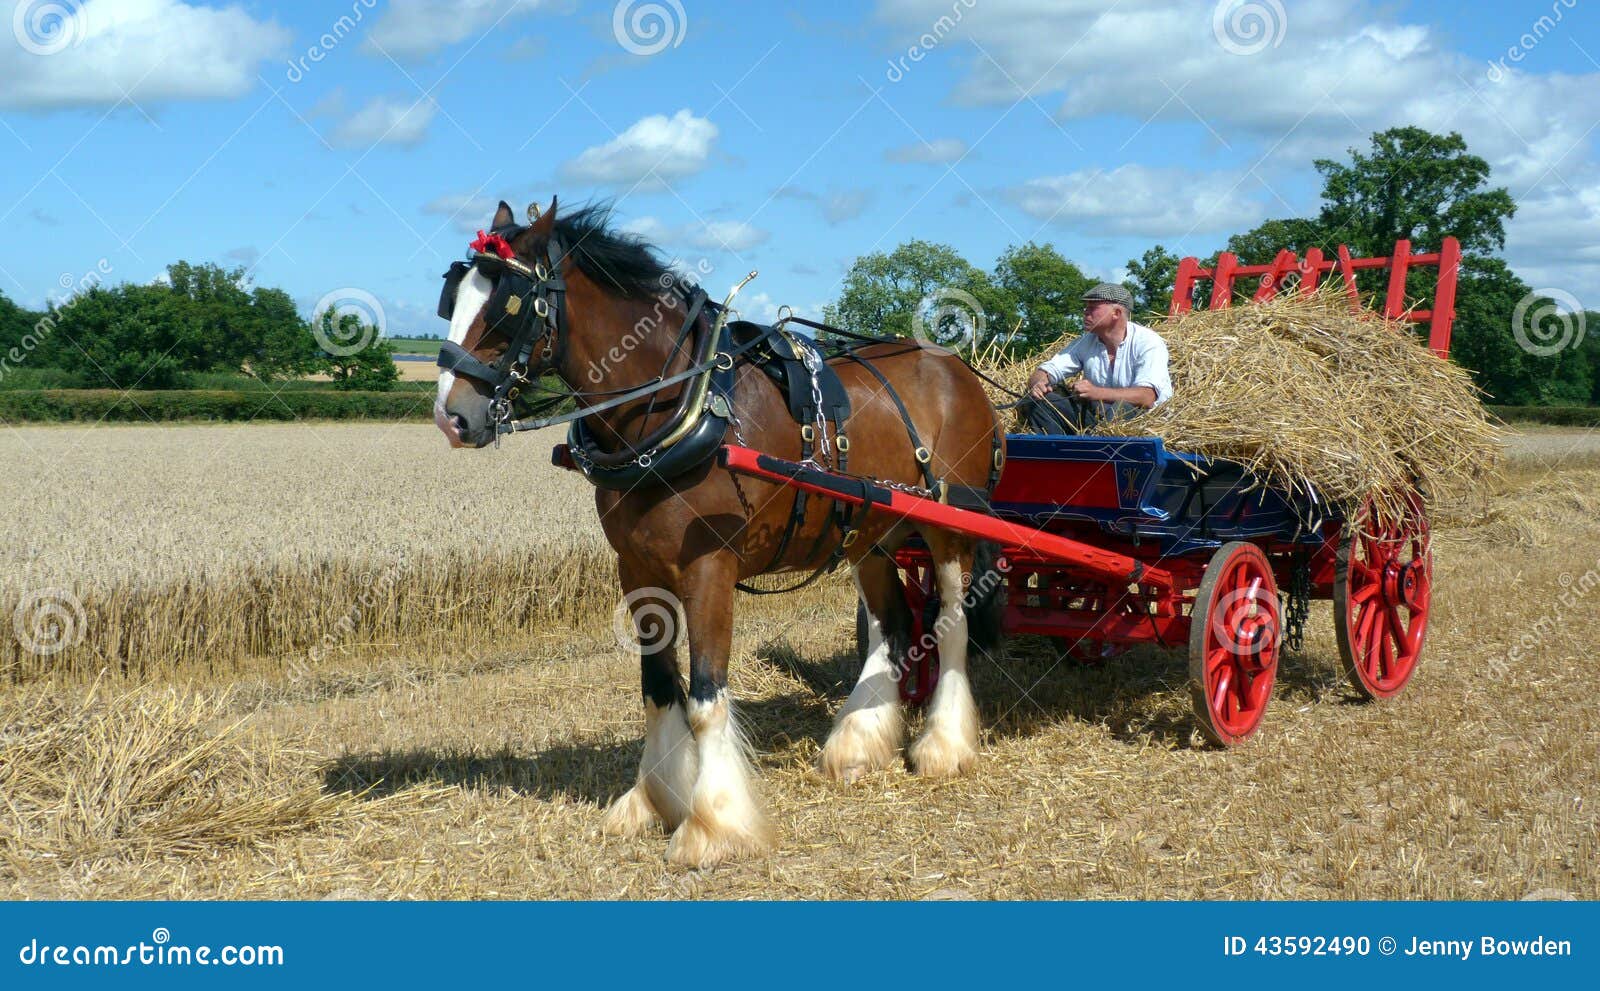 shire-horse-straw-wagon-country-show-farm-working-day-event-somerset-england-43592490.jpg